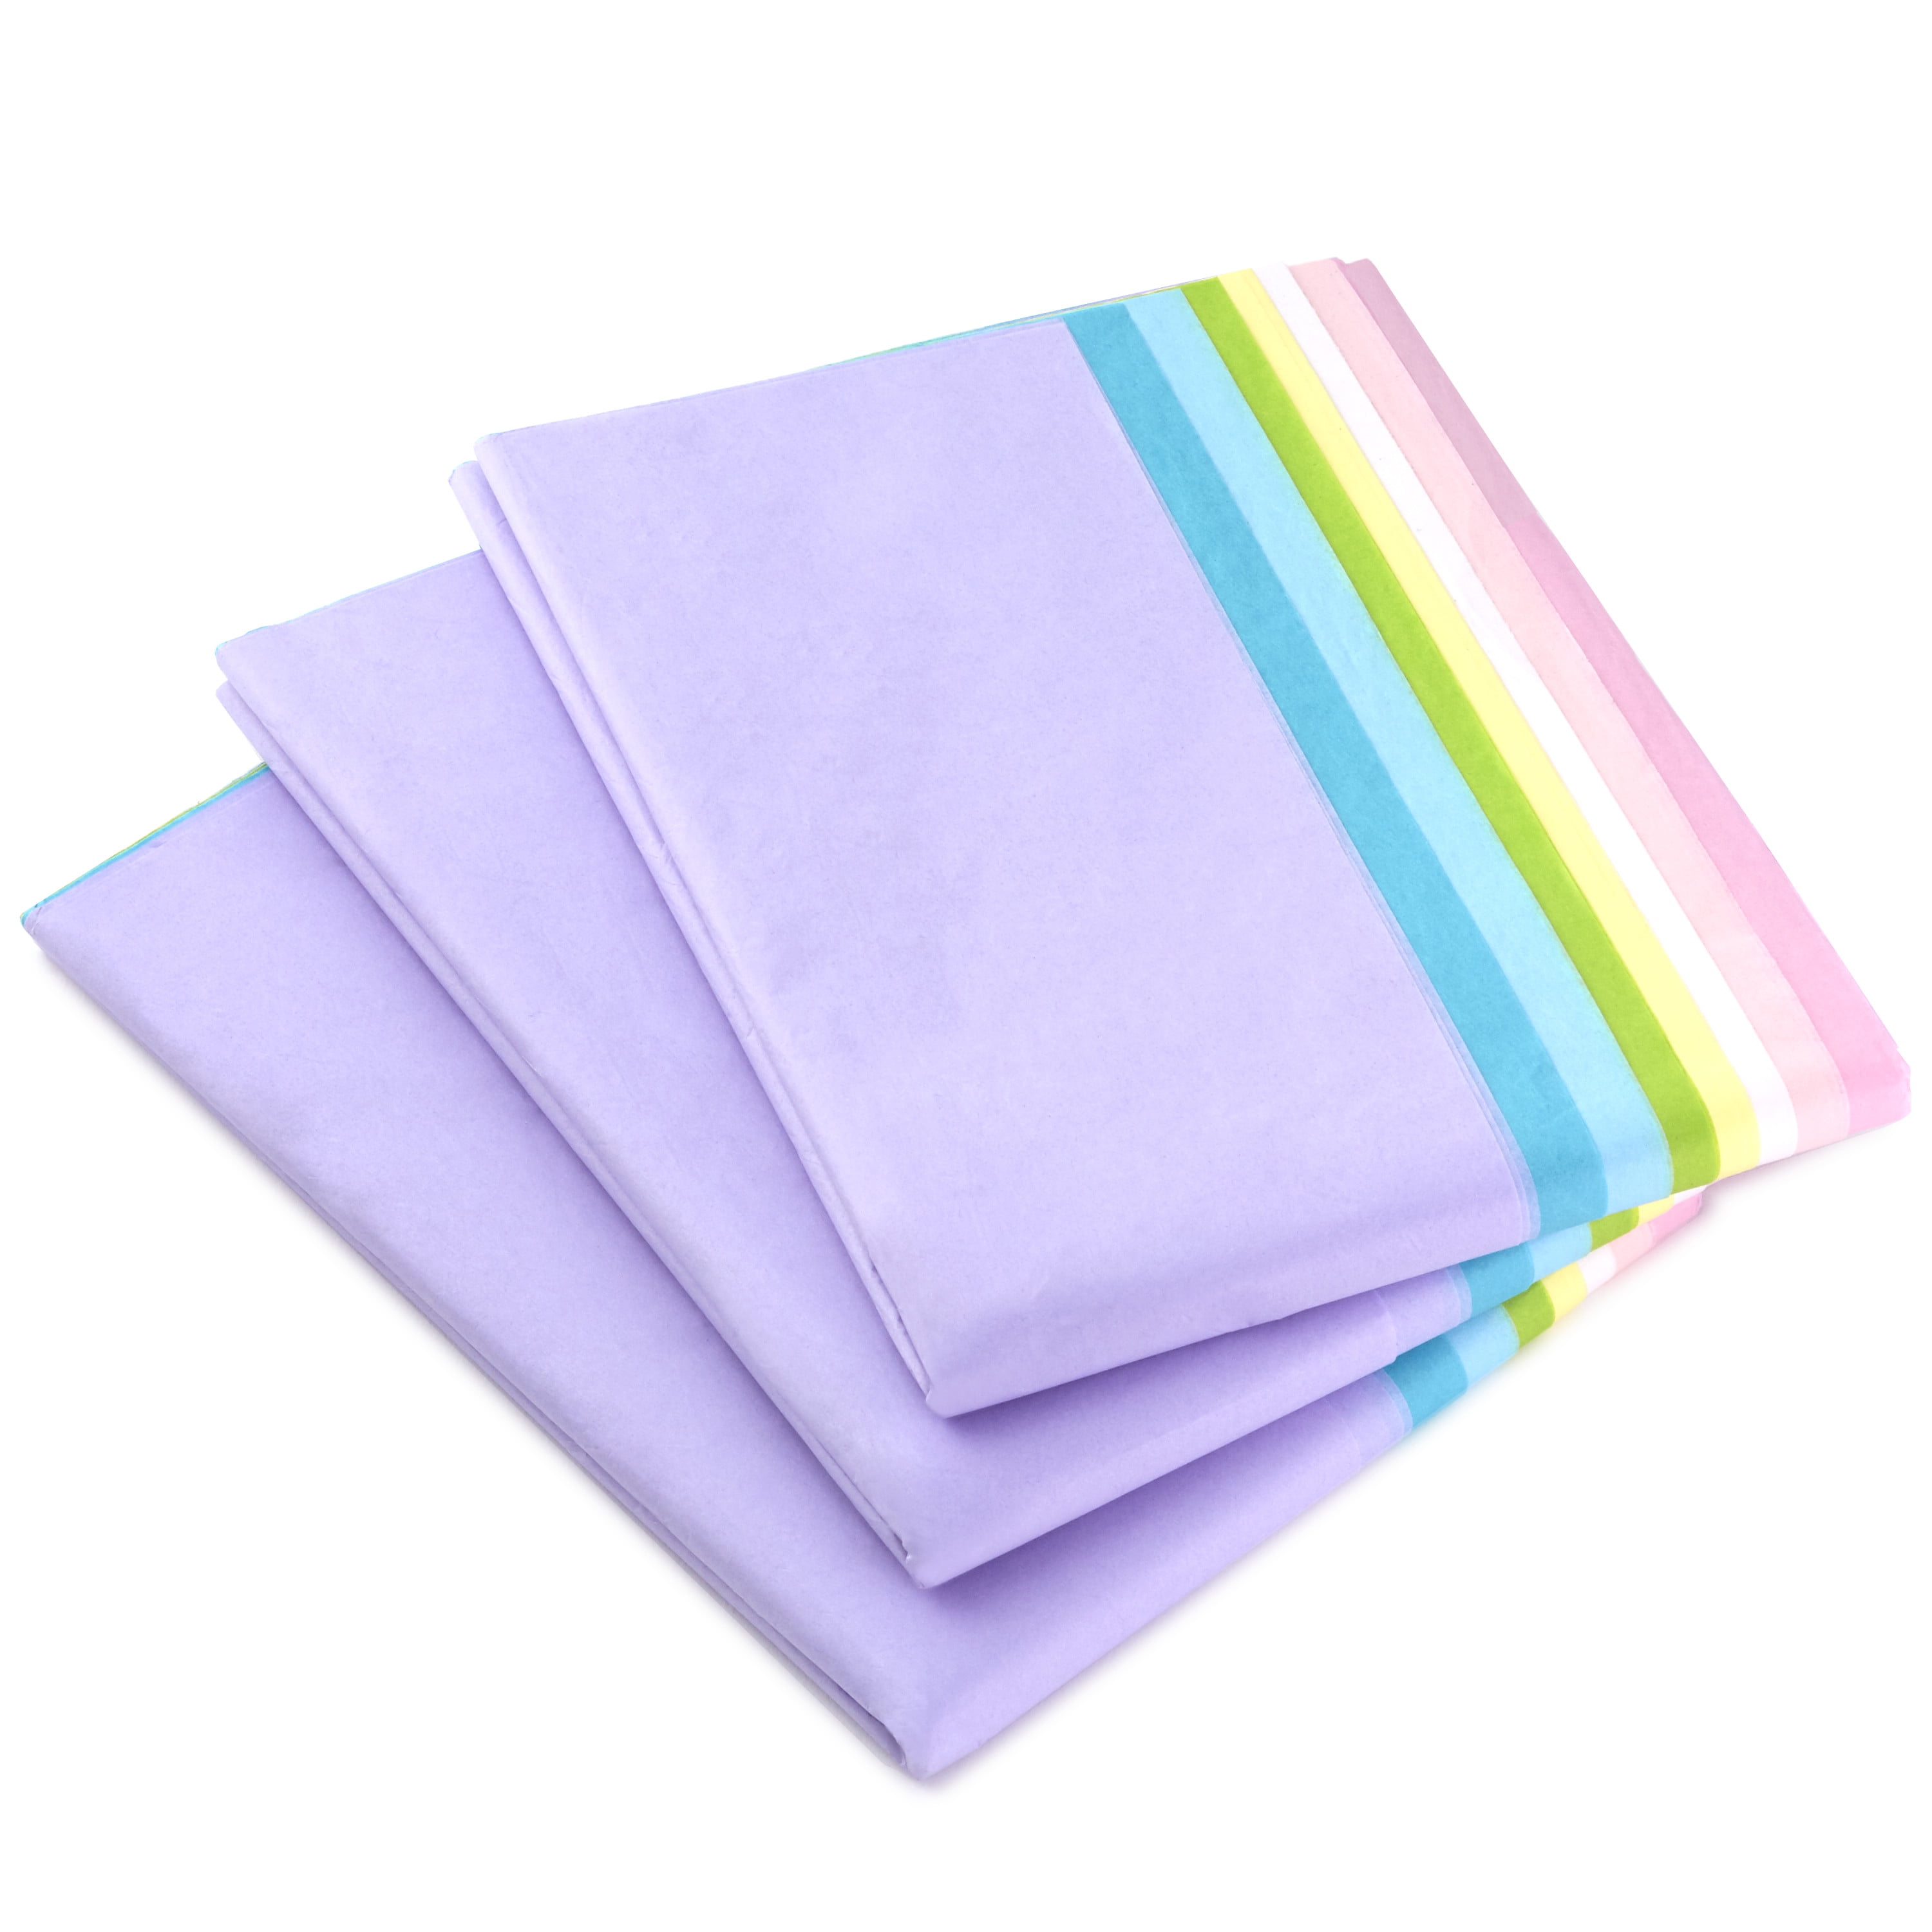  Shindel 120 Sheets Colorful Tissue Paper, Tissue Paper